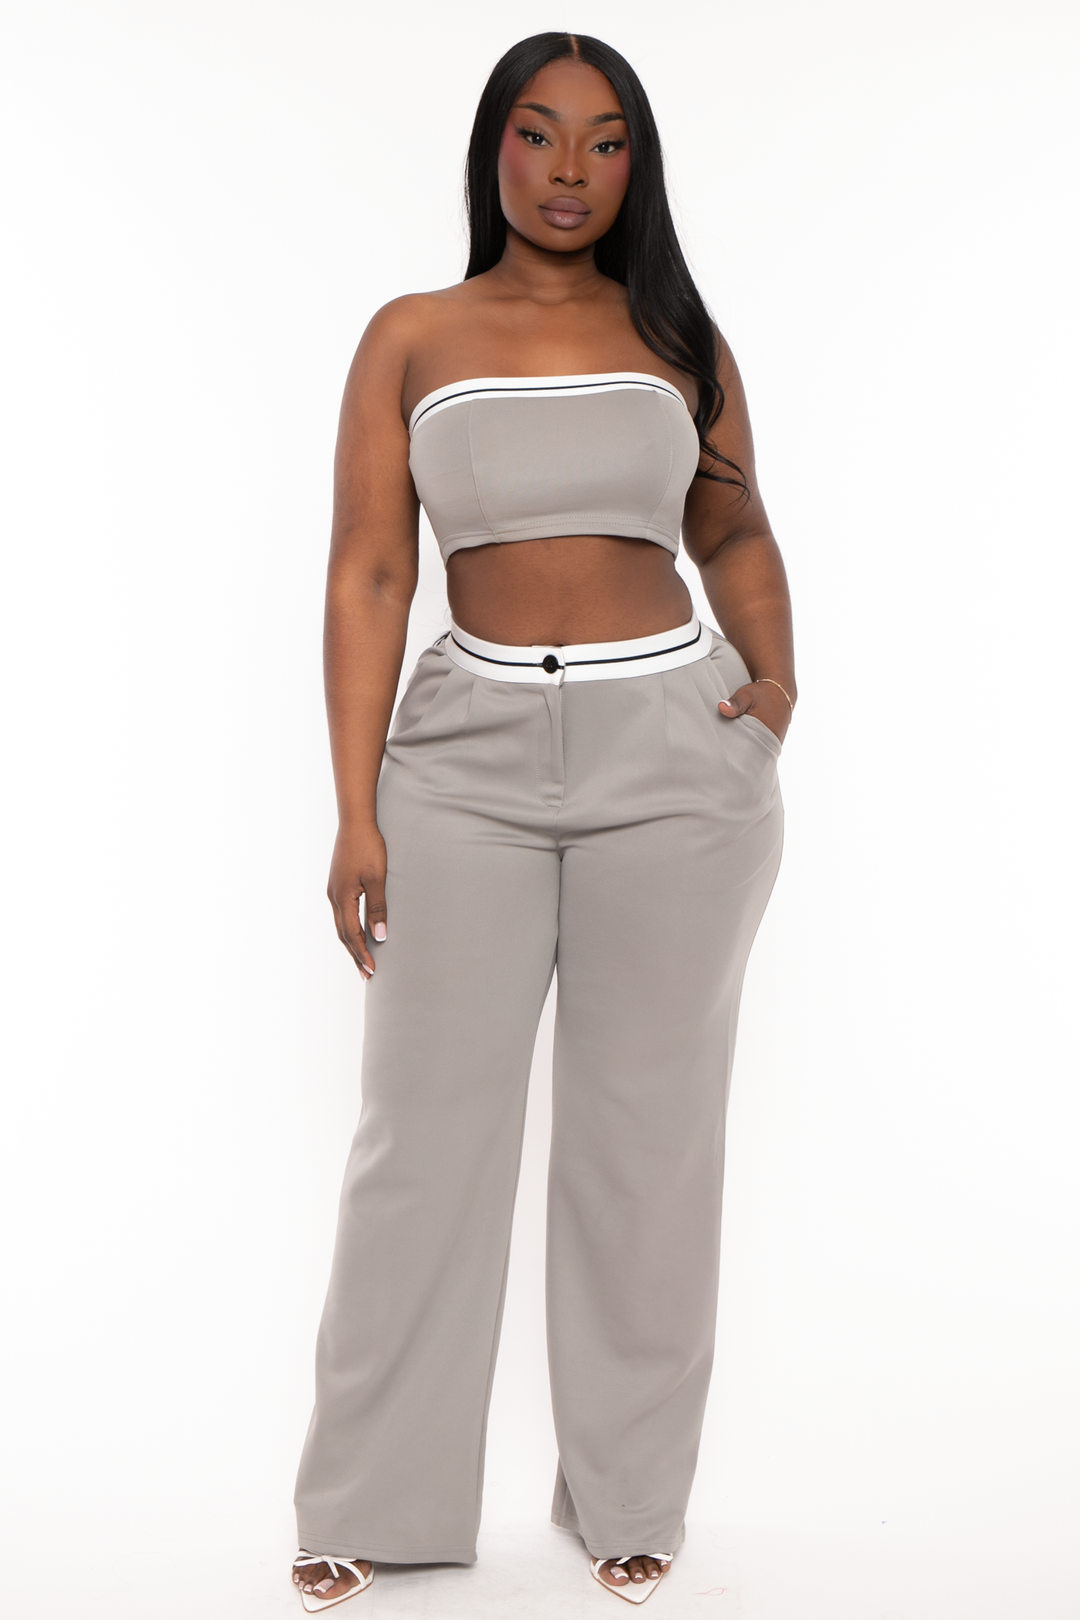 Balance Collection Plus-Sized Clothing On Sale Up To 90% Off